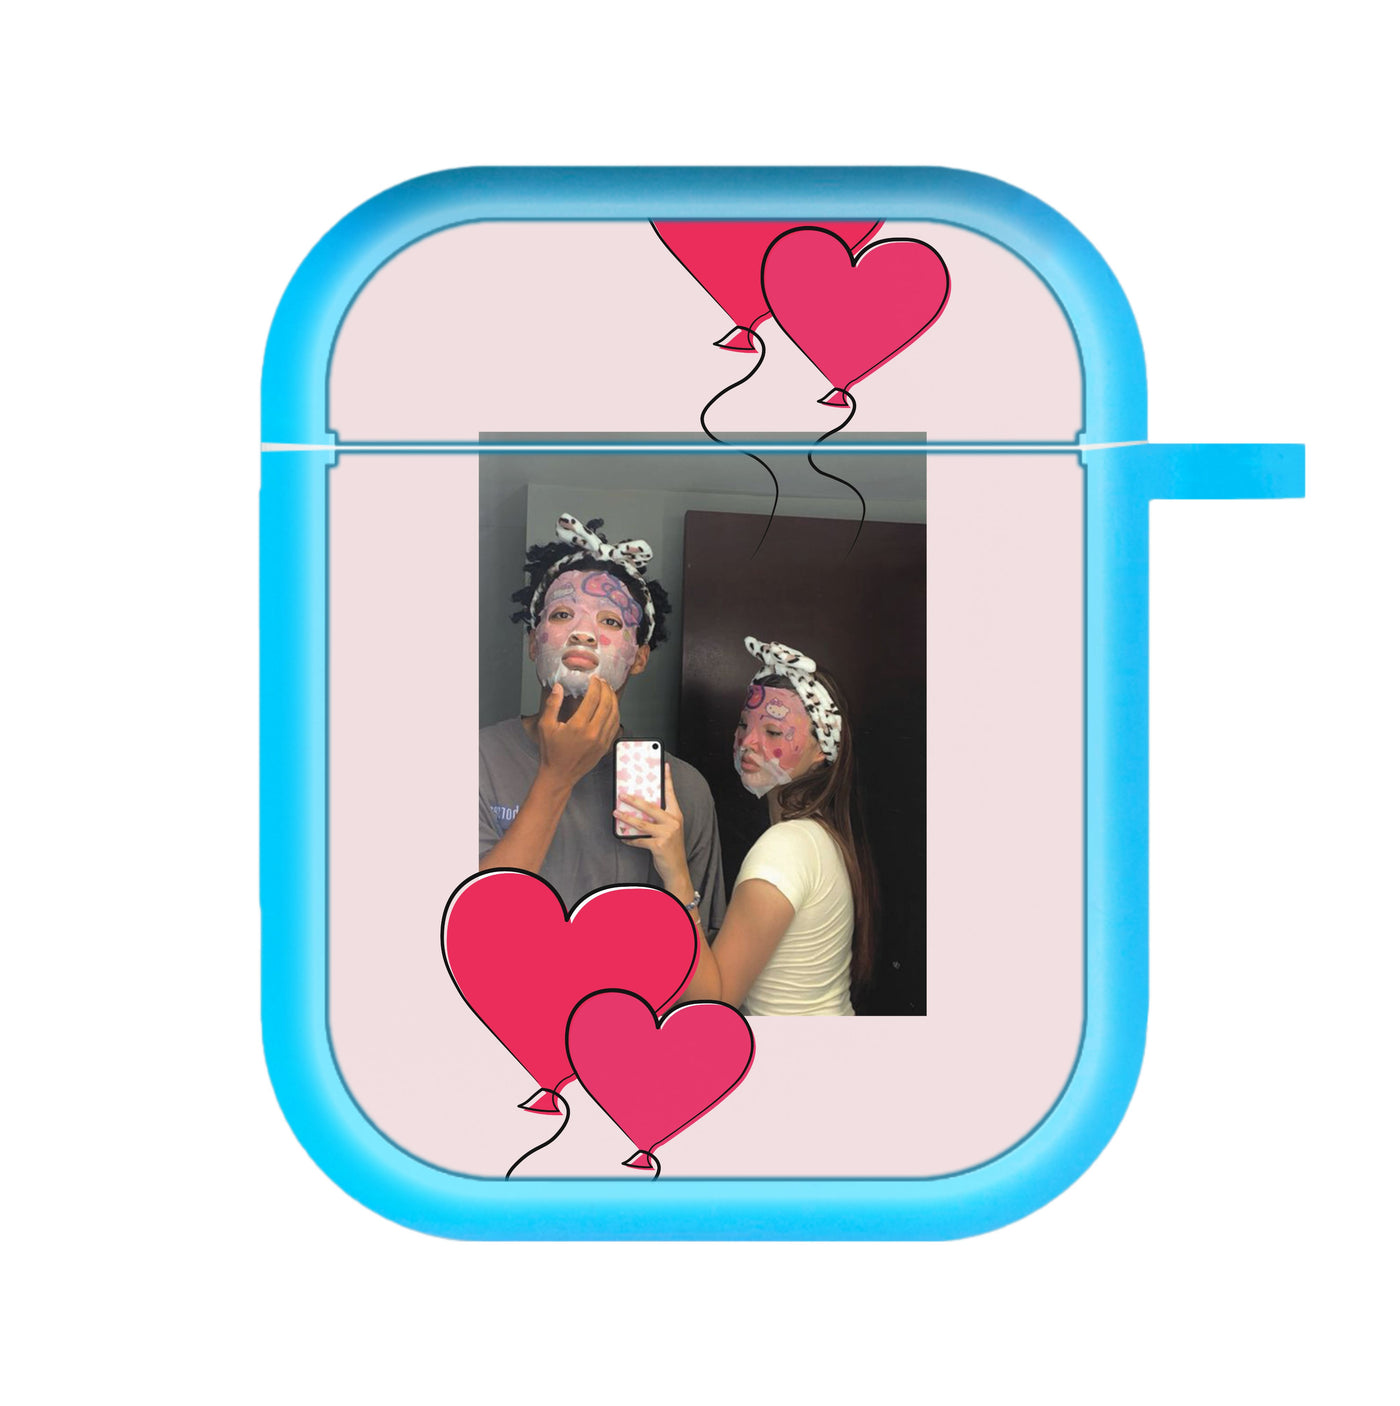 Heart Balloons - Personalised Couples AirPods Case